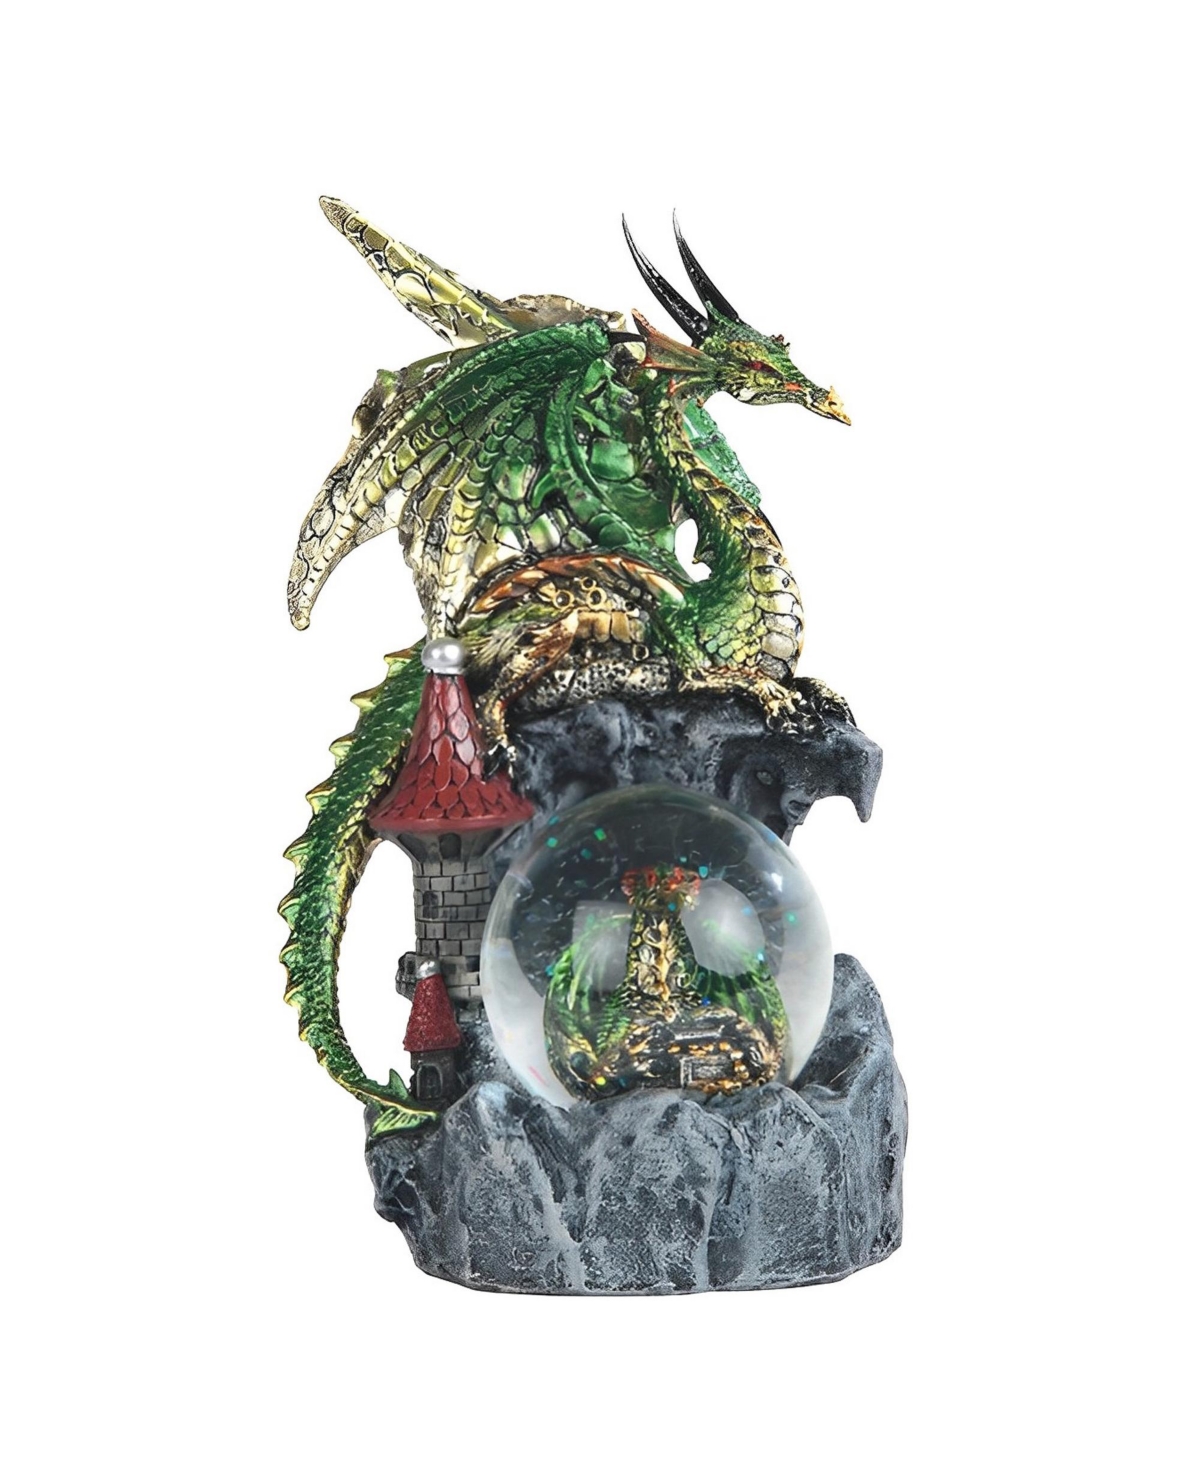 8"H Green Dragon on Castle with Snow Globe Figurine Home Decor Perfect Gift for House Warming, Holidays and Birthdays - Multicolor